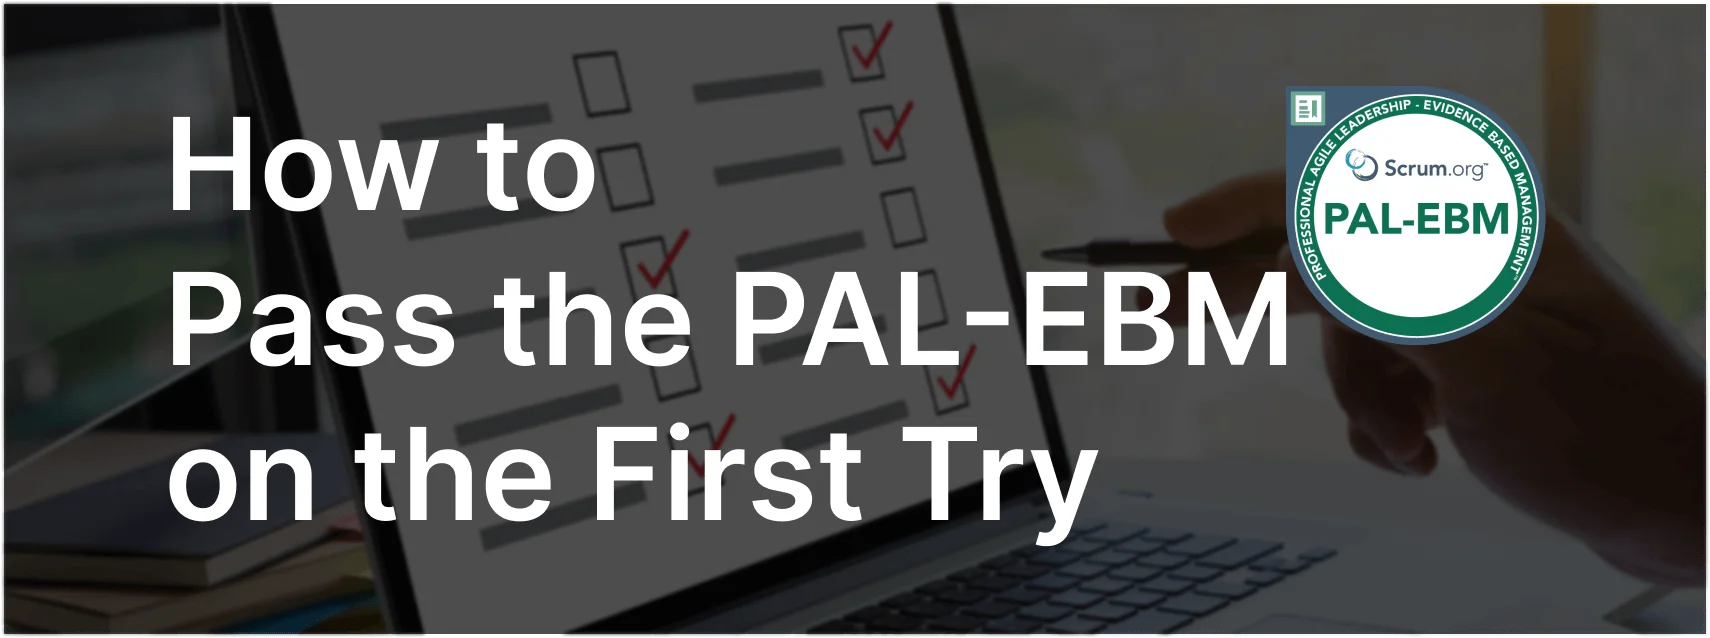 How To Pass PAL-EBM Exam on the First Try